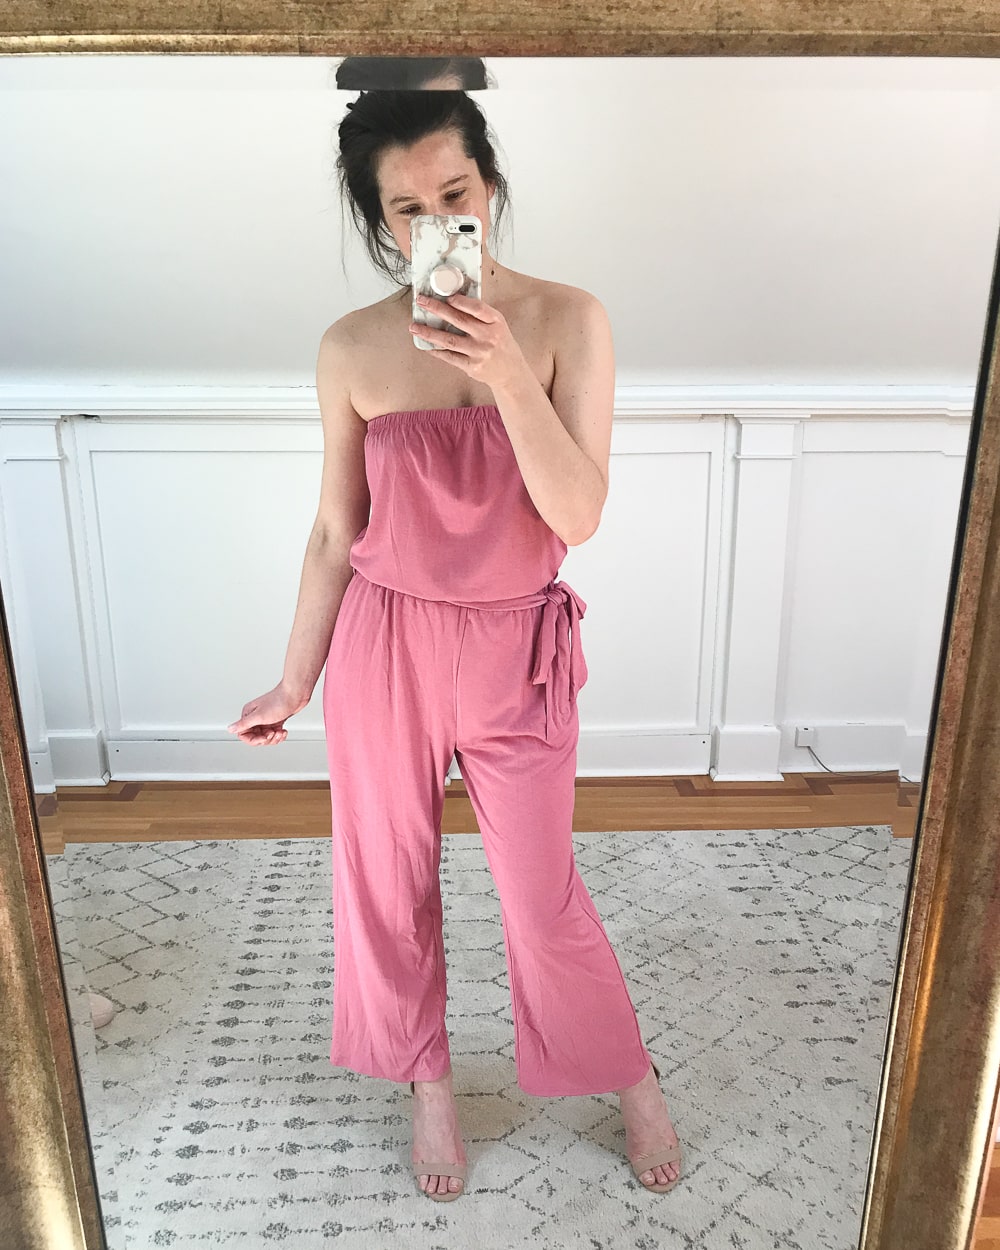 Amazon strapless wide leg jumpsuit tried on by affordable fashion blogger Stephanie Ziajka as part of her Amazon June try-on haul on Diary of a Debutante